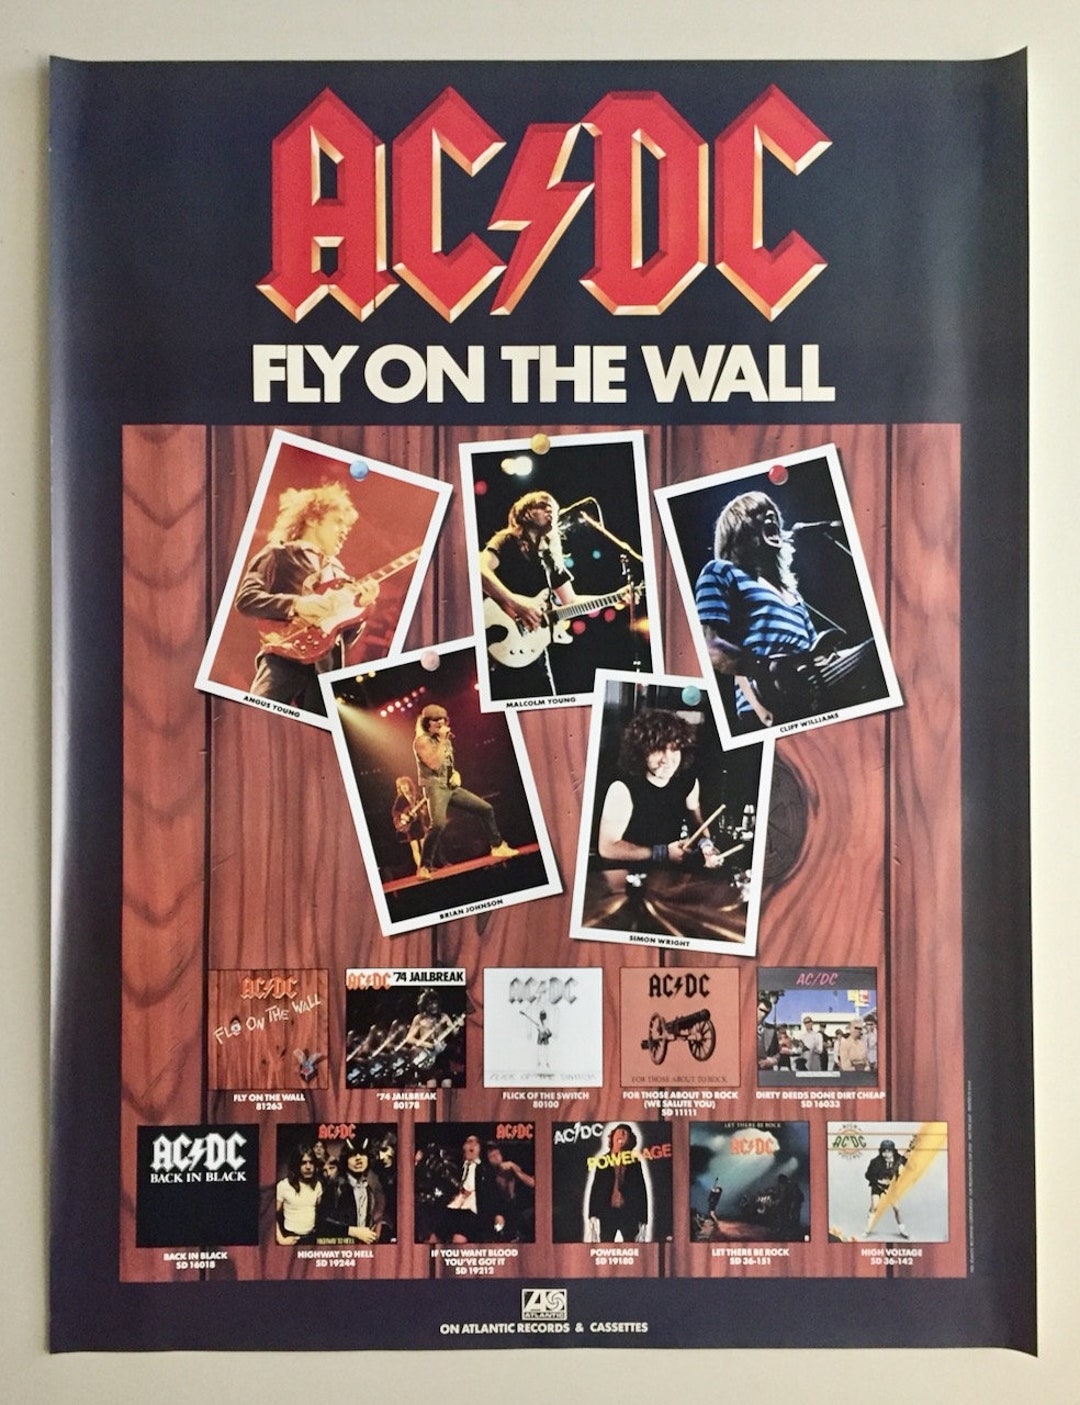 AC/DC - Jailbreak 1974  Rock music, Rock band posters, Band posters